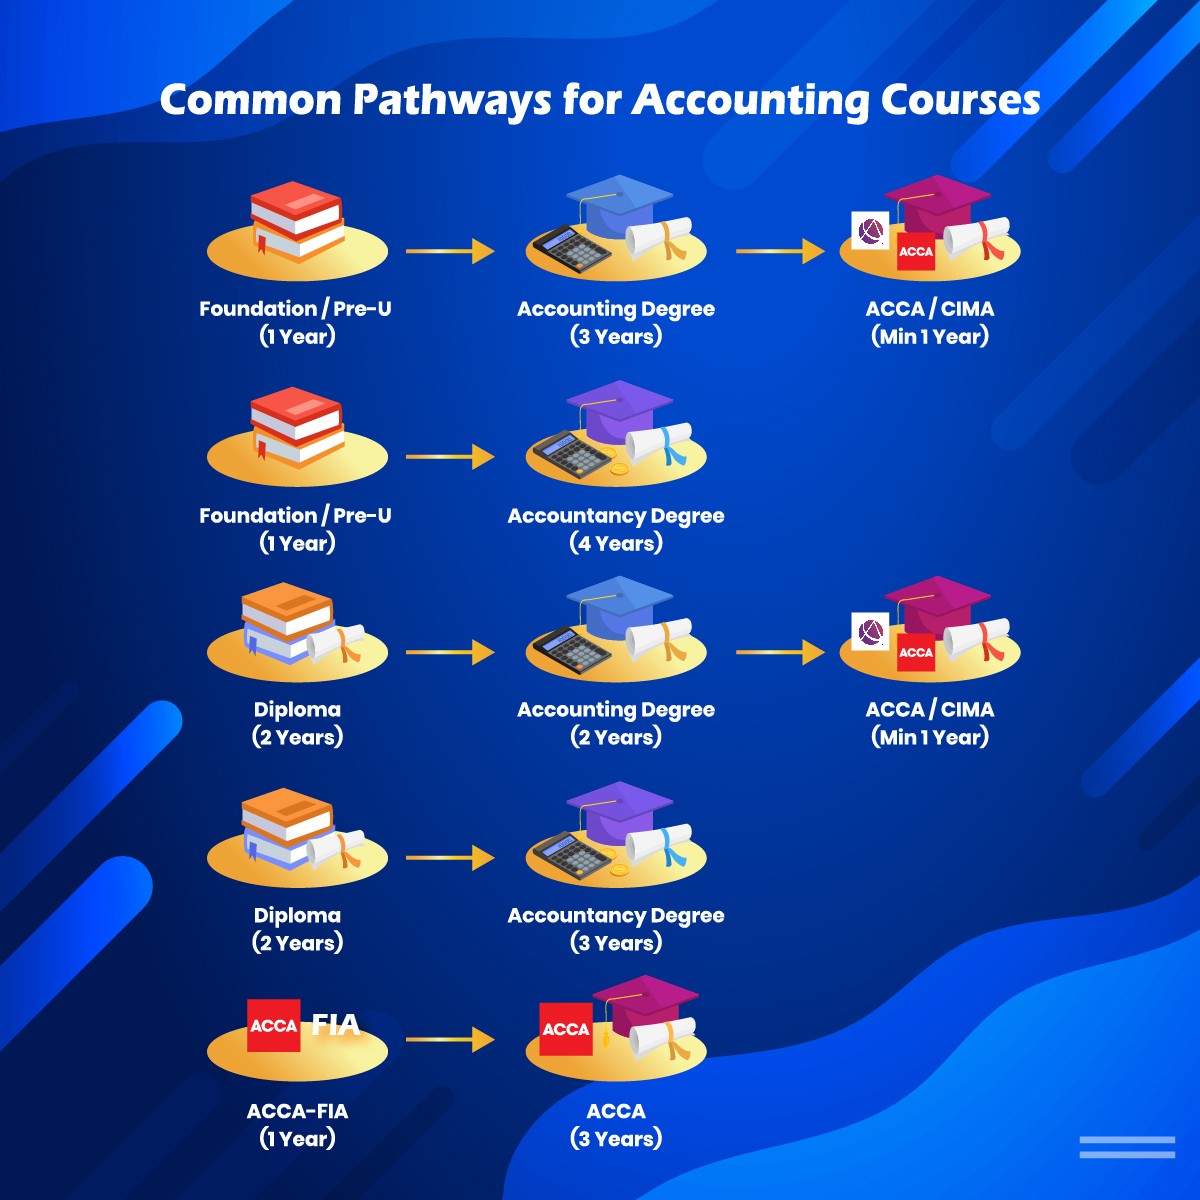 Common Pathways to Accounting Courses